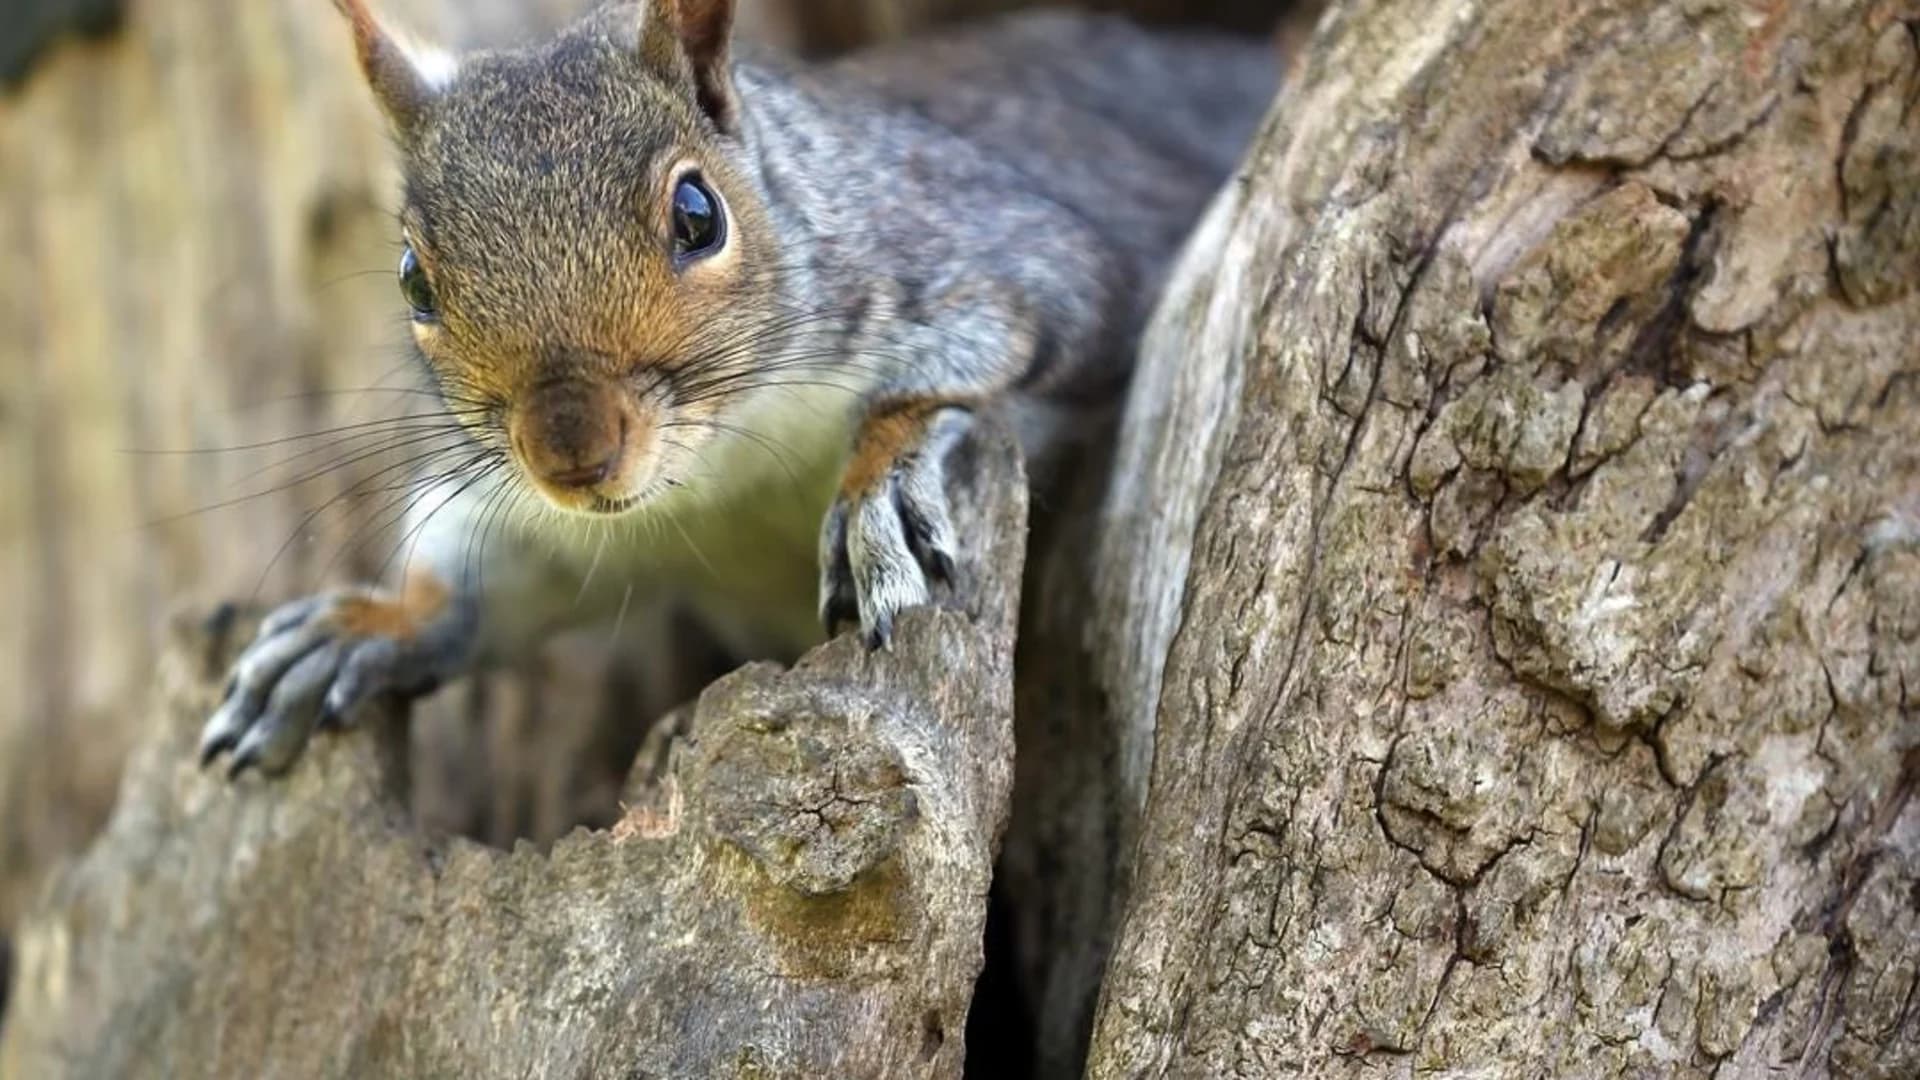 City warns of possible rabid squirrel in Prospect Park